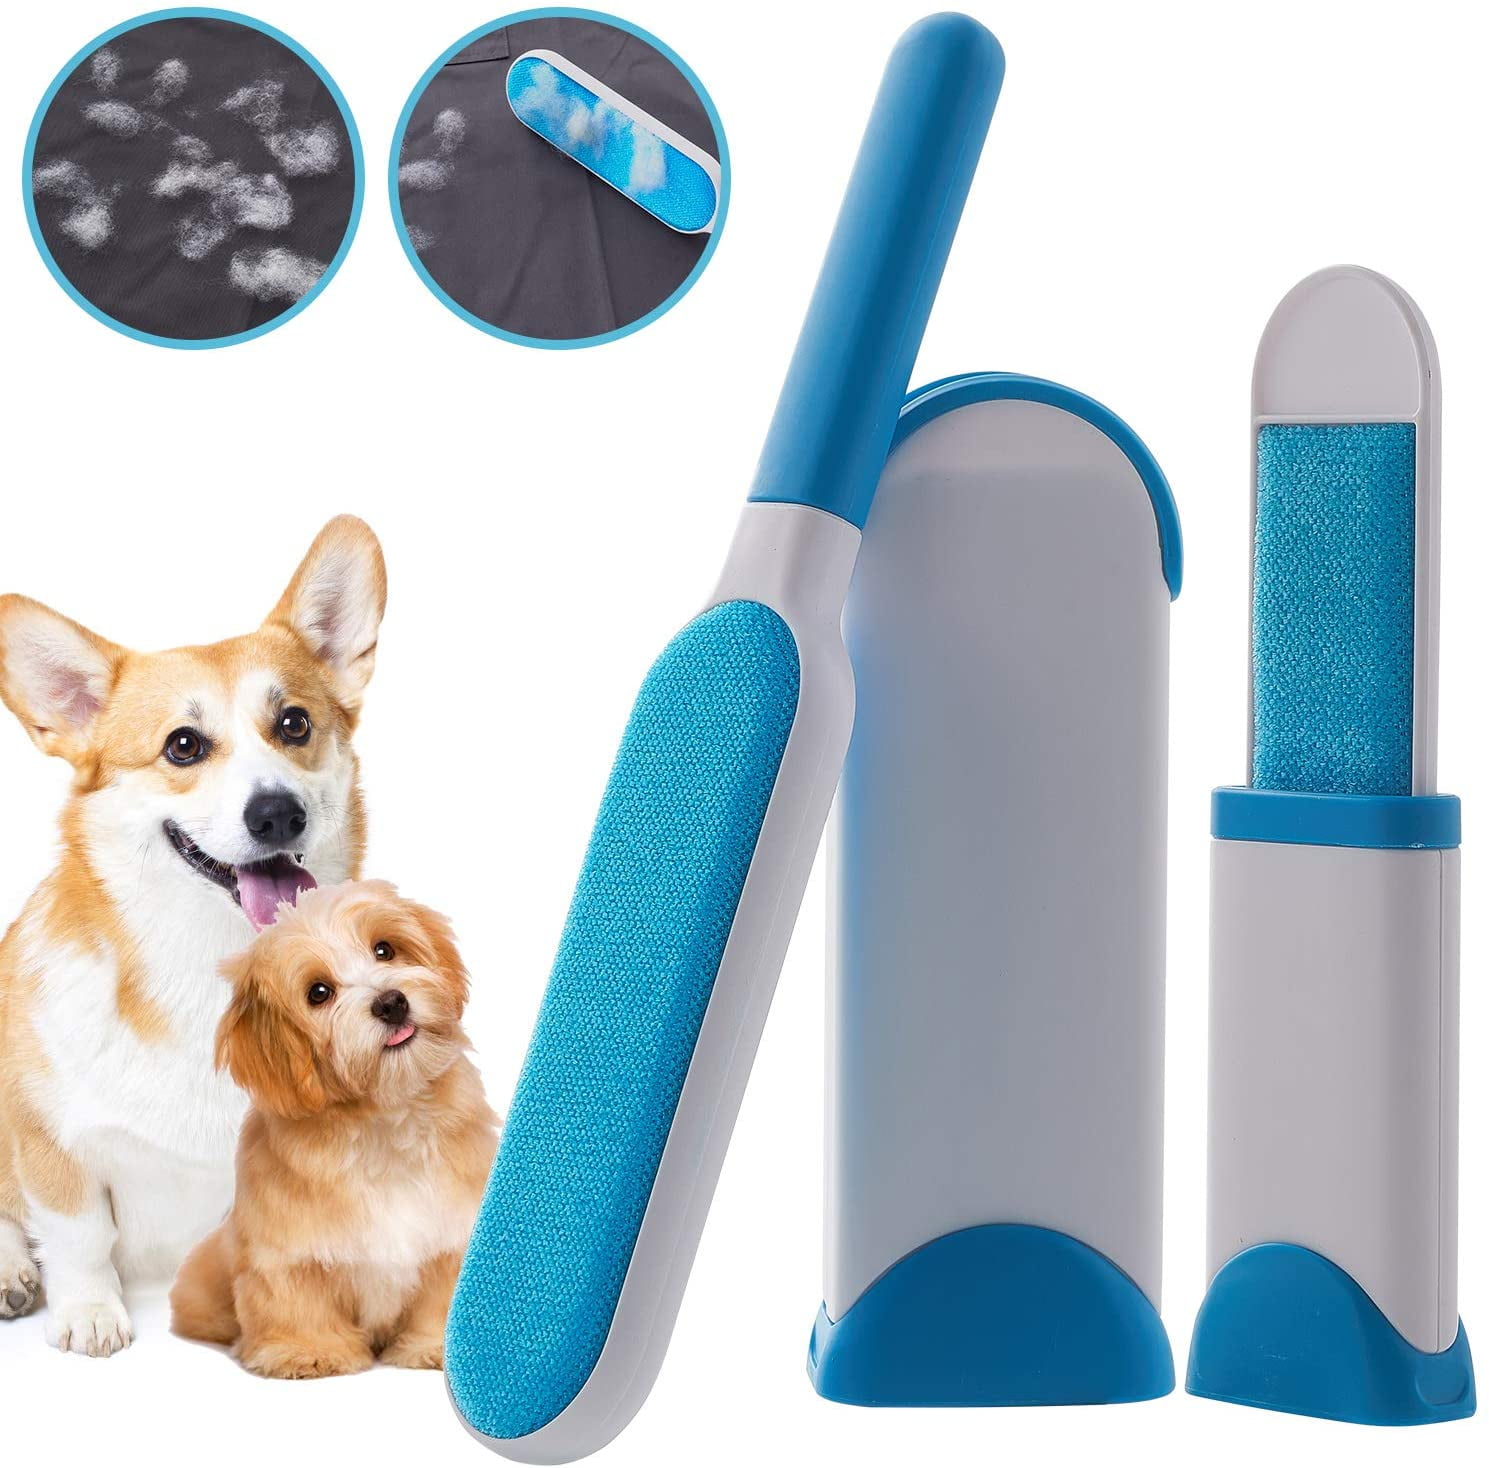 Dropship Pet Grooming; Pet Hair Remover Brush Manual Lint Roller Removing  Dog Cat Hair Lint Remover For Sofa Clothes Cleaning Lint Brush Pet Supplies  to Sell Online at a Lower Price